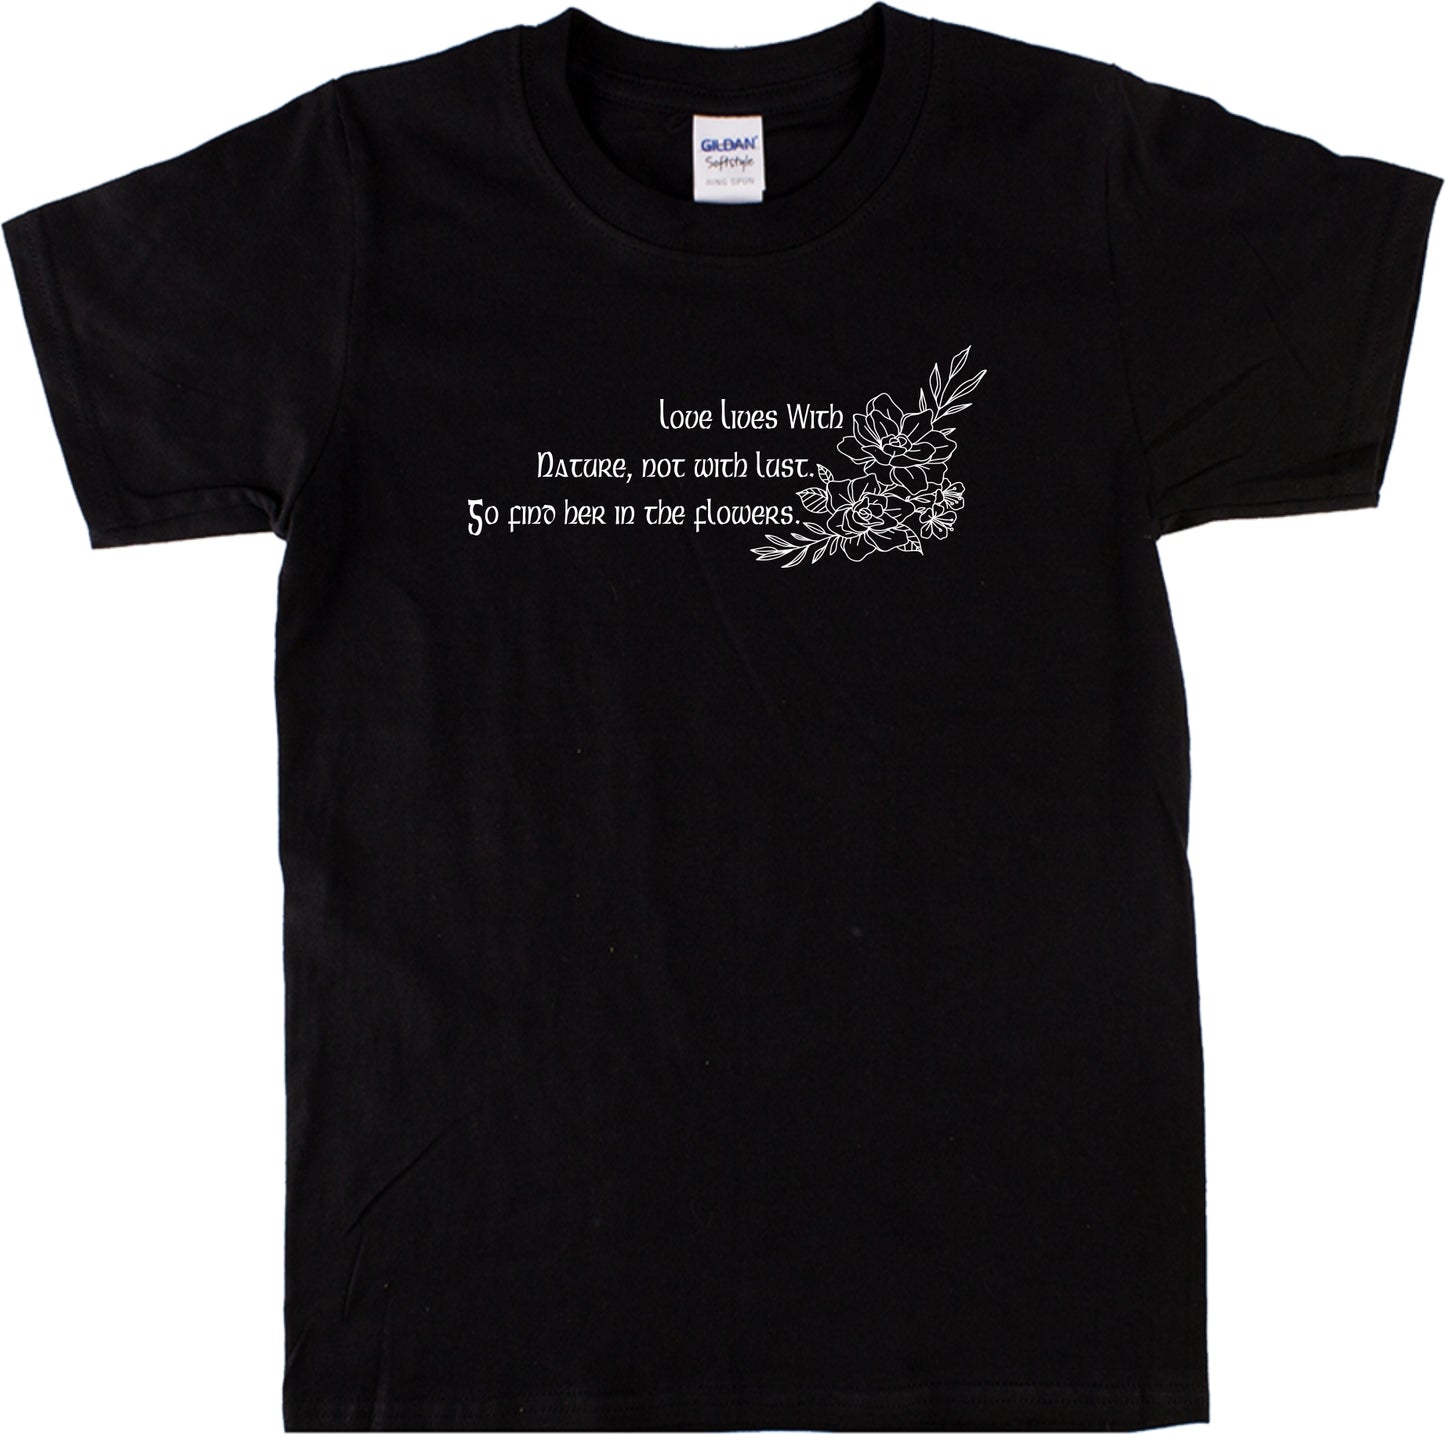 John Clare Poet T-Shirt -'Love lives with nature, not with lust. Go find her in the flowers', Various Colours